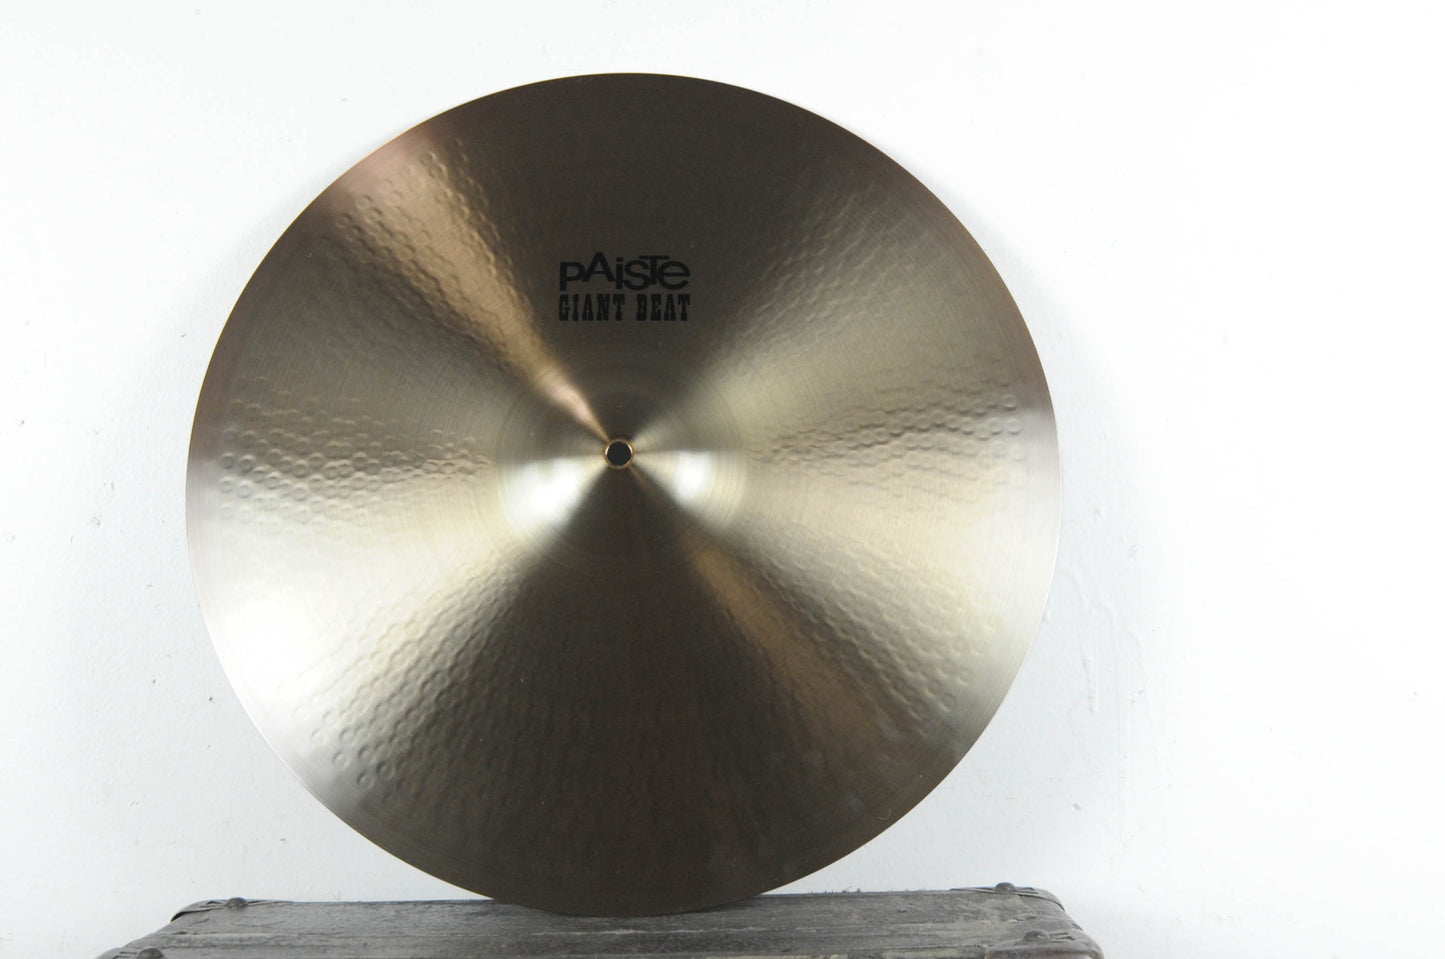 Paiste 18" Giant Beat Multi-Functional Cymbal 1314g